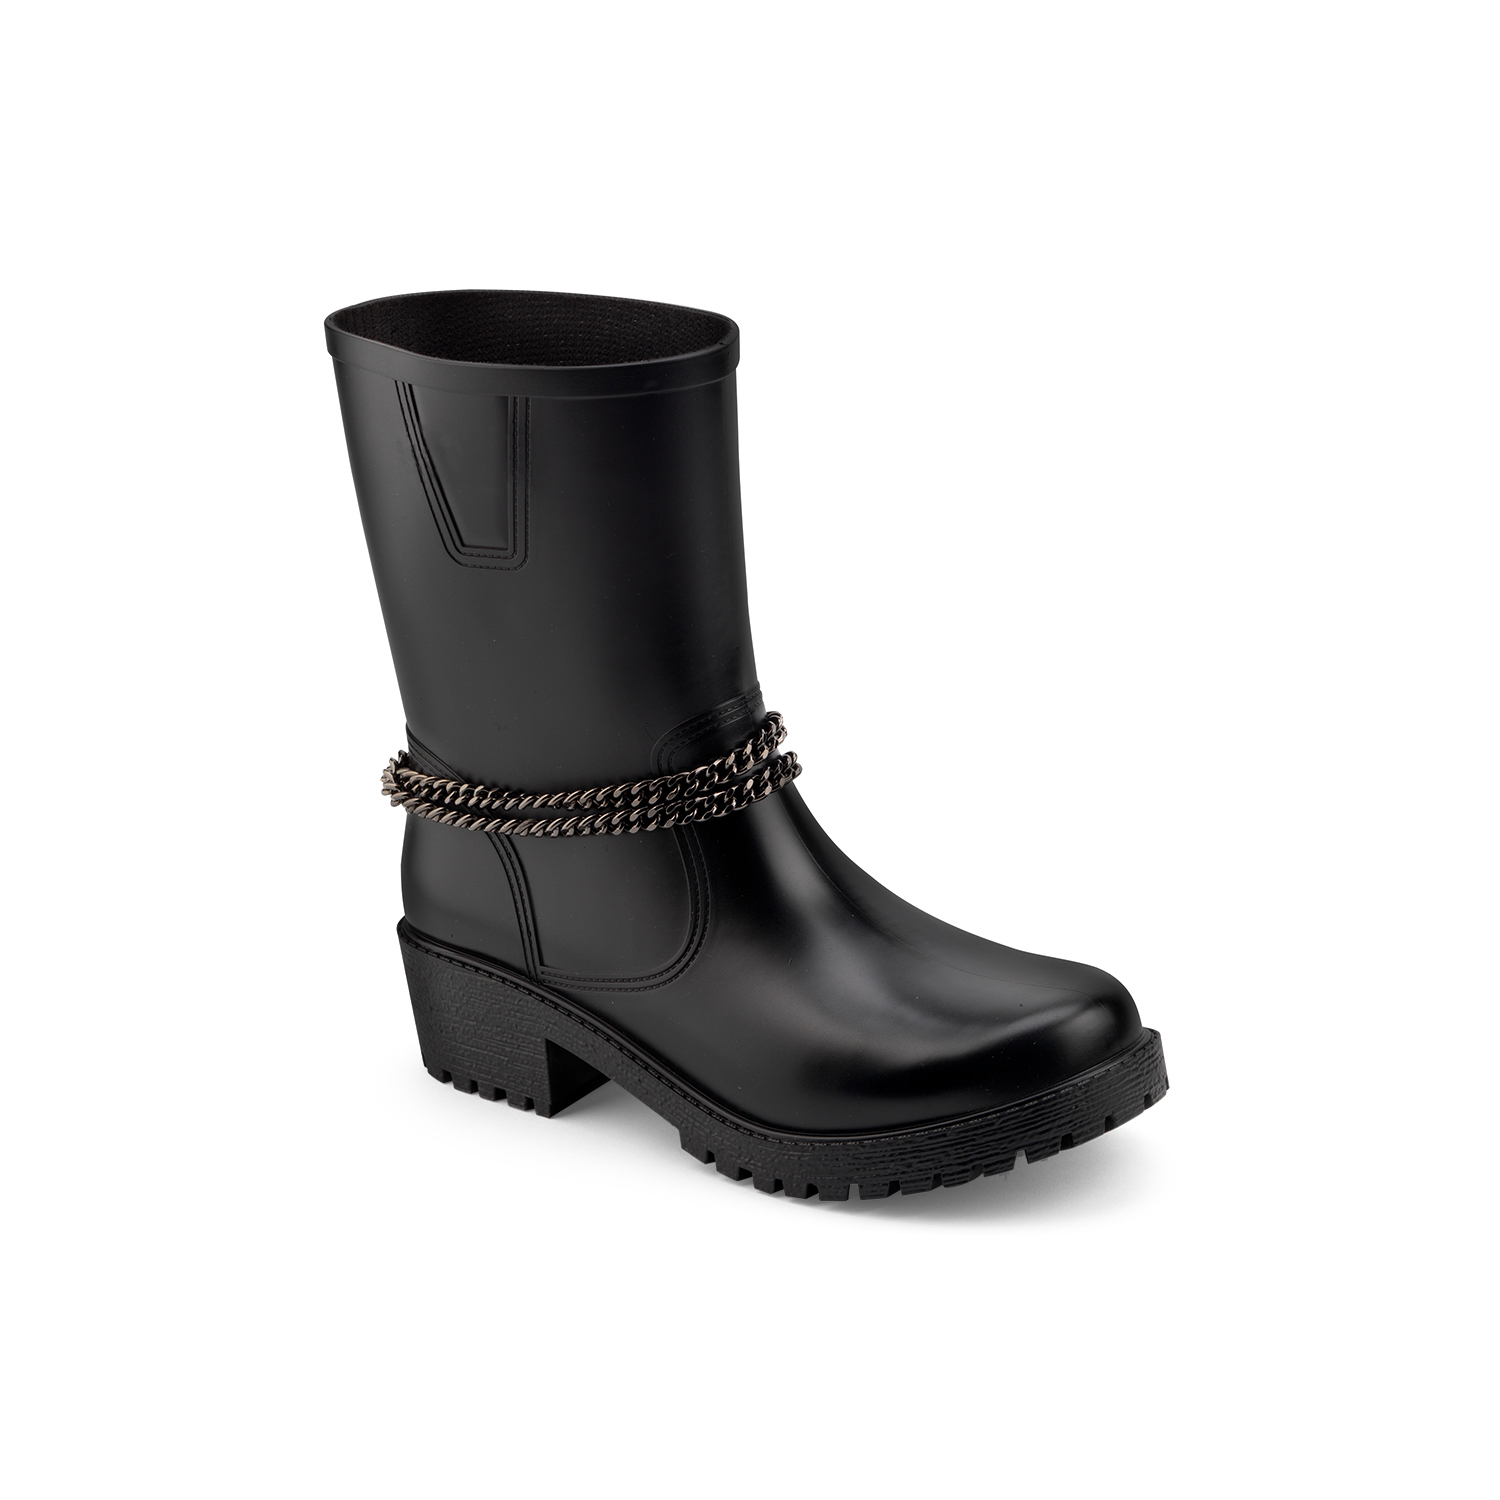 Matt finish pvc biker boot model with ankle double chain. Made in Italy